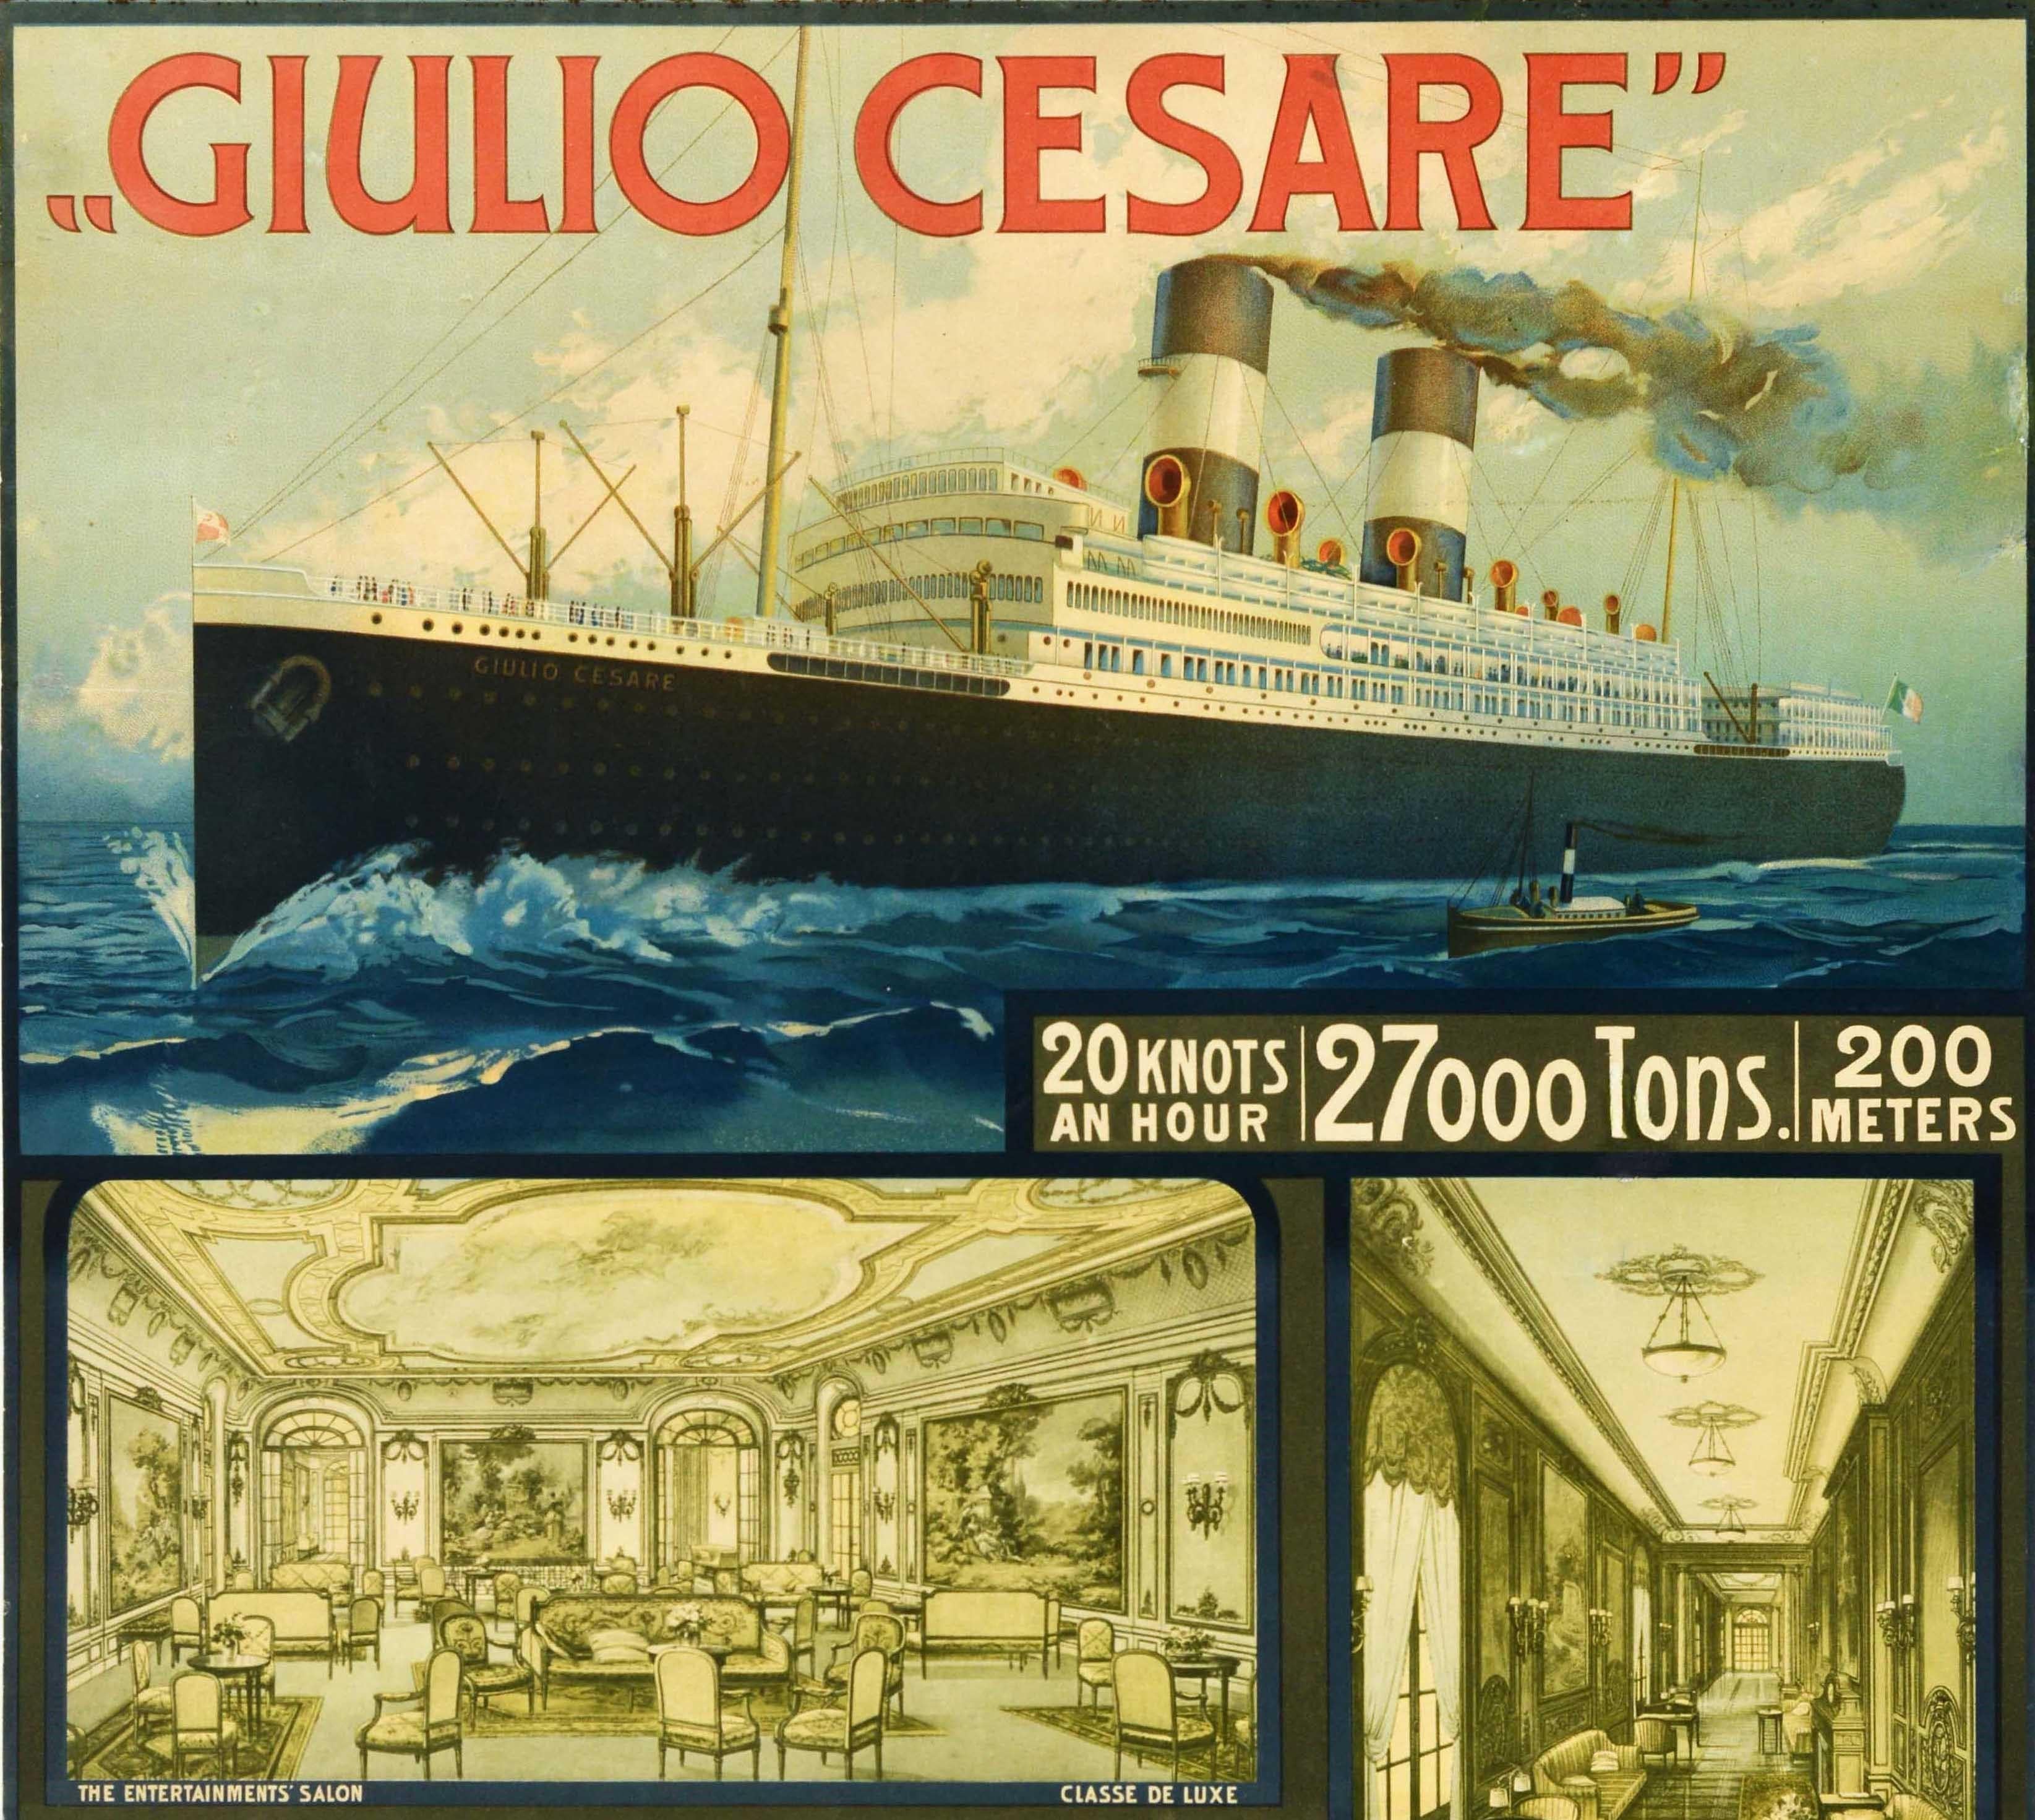 Original vintage cruise travel poster - Giulio Cesare Genoa Buenos Ayres Navigazione Generale Italiana - featuring an image of the ocean liner at sea above smaller views showing the Classe de Luxe / luxury class life on board the SS Giulio Cesare